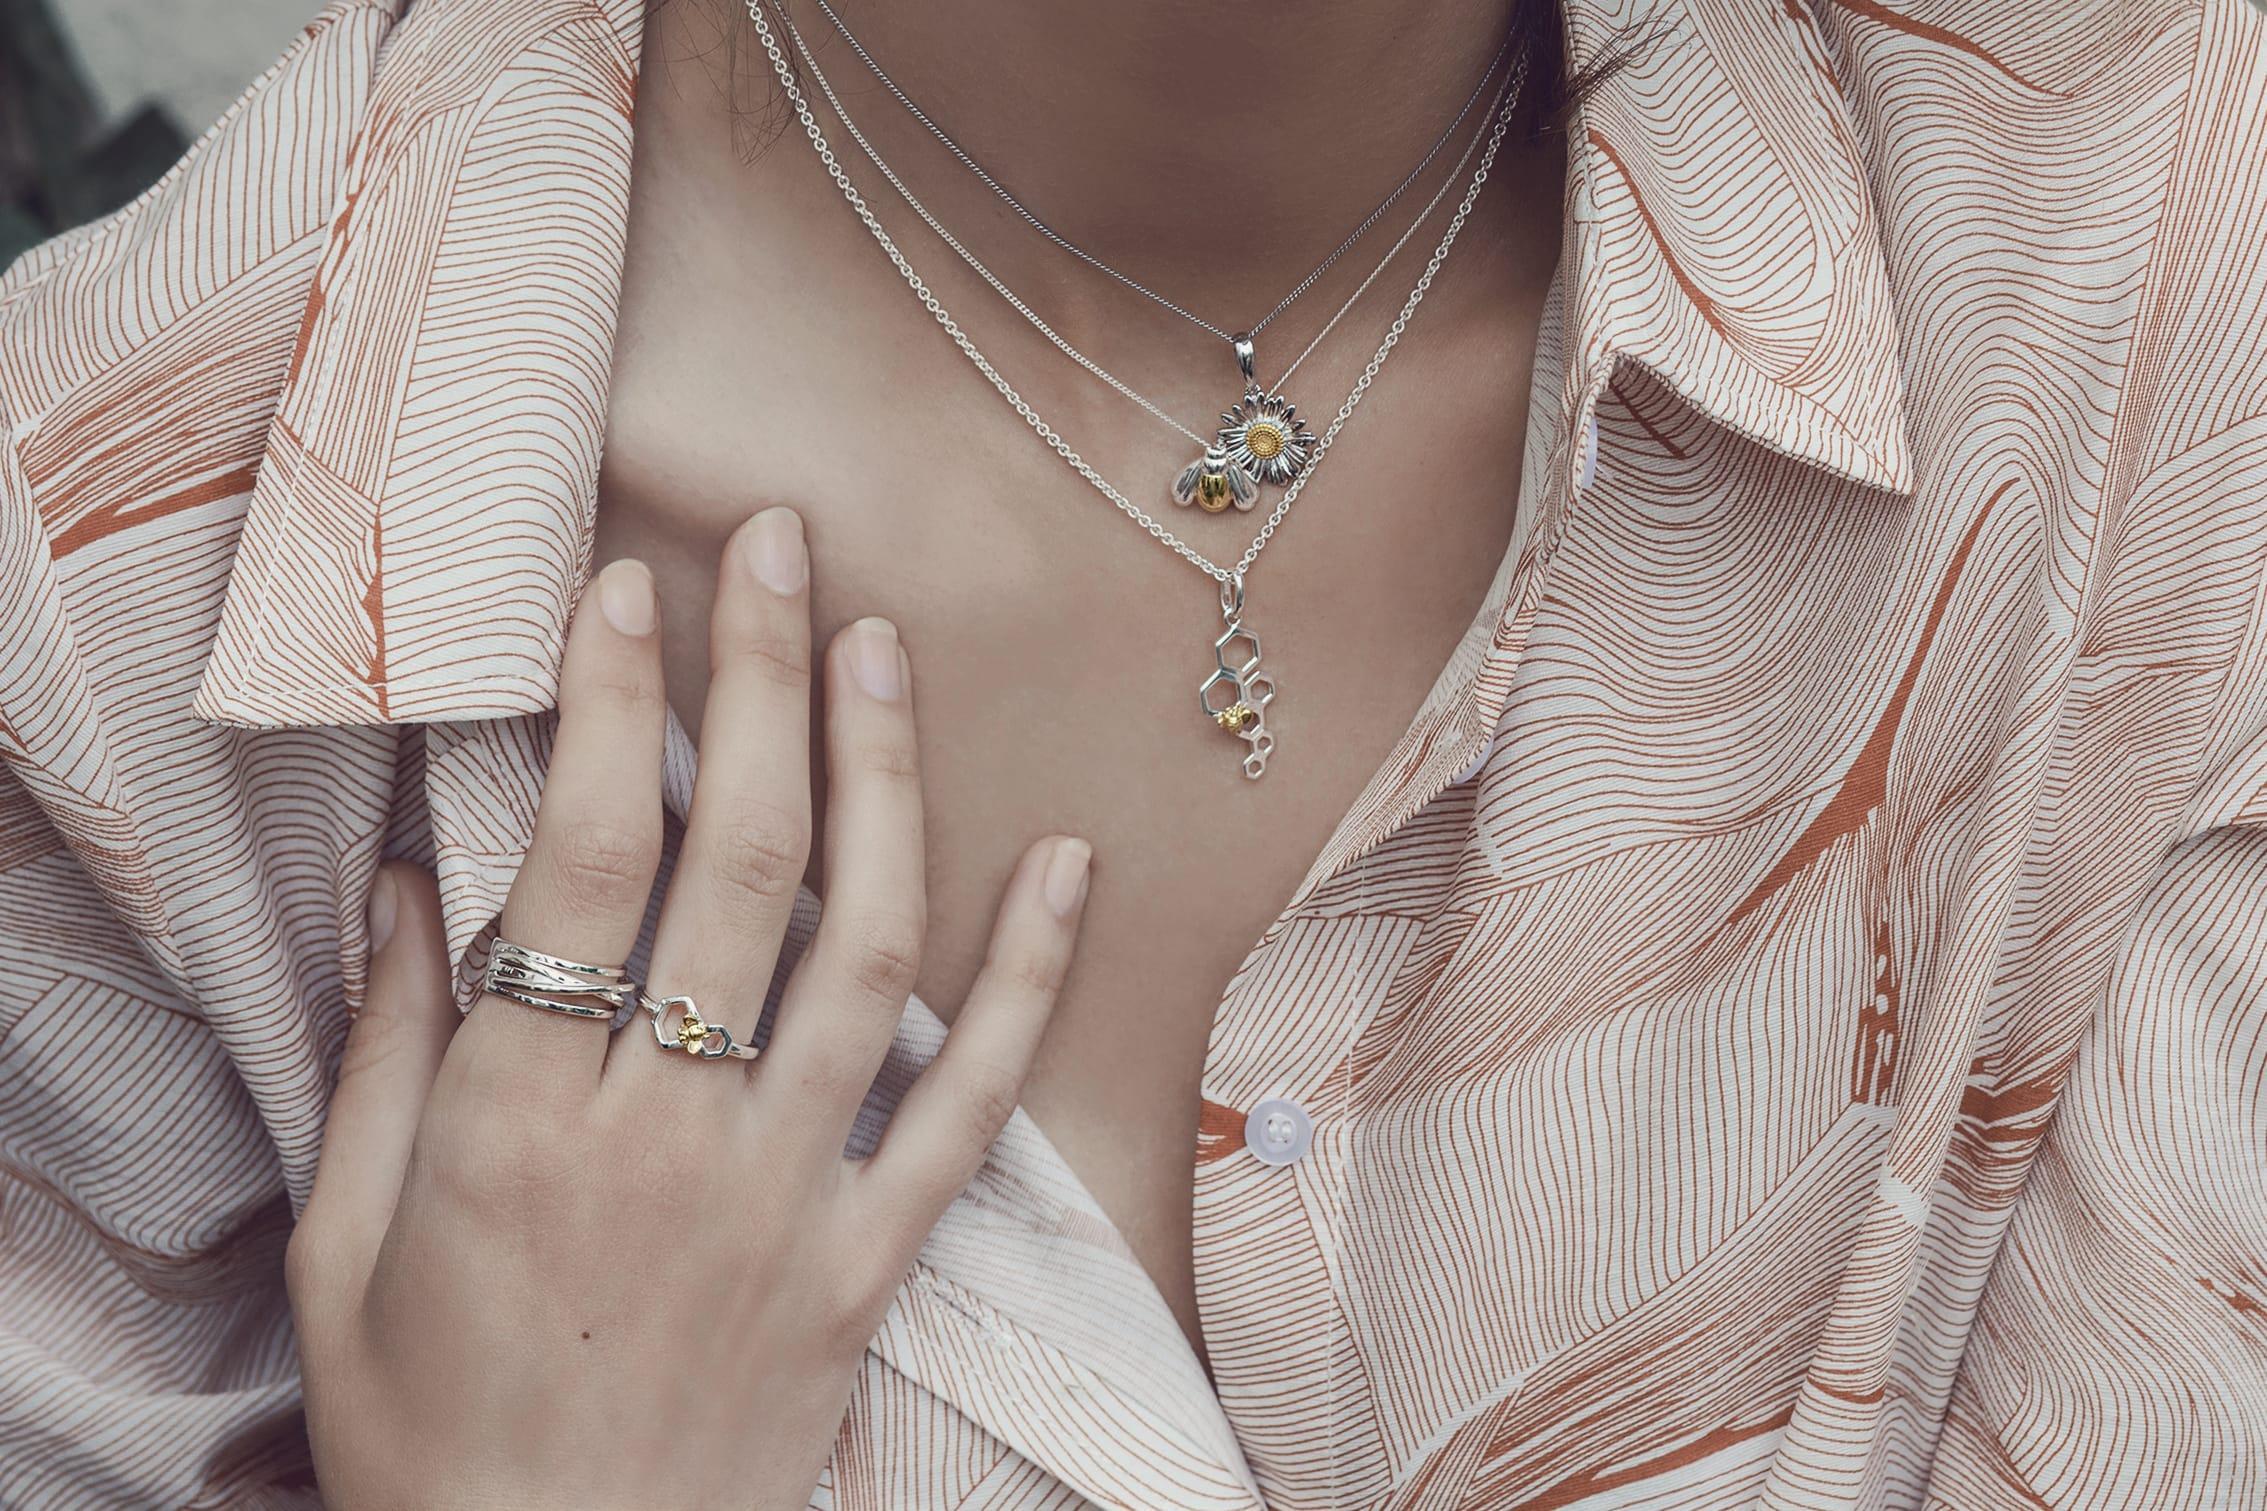 World Bee Day 2021 Model wears jewellery from Joshua James Serenity collection, including bee and honeycomb necklaces and ring.